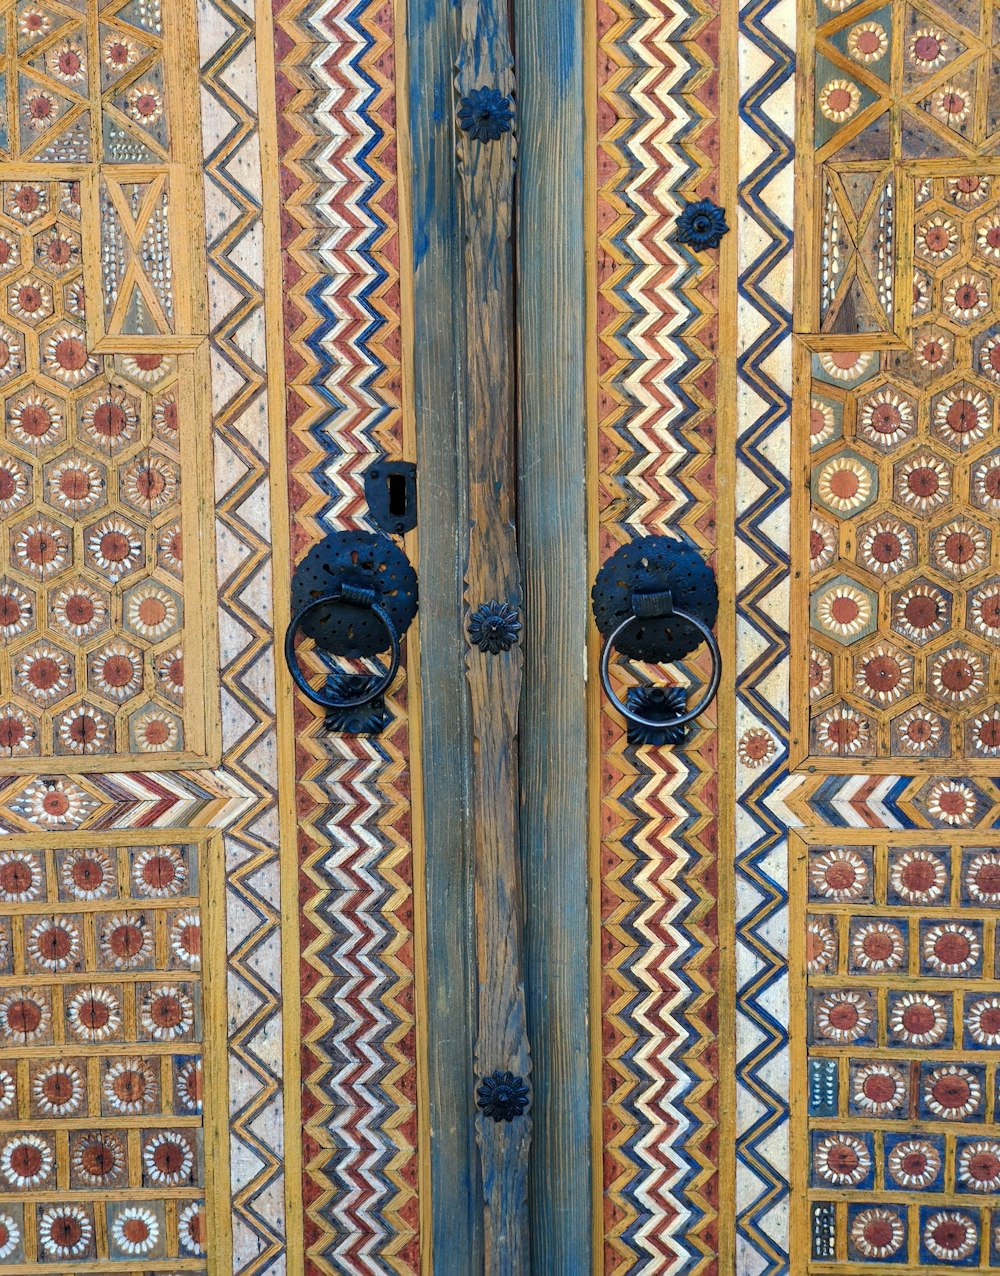 a close up of a door with a wooden handle